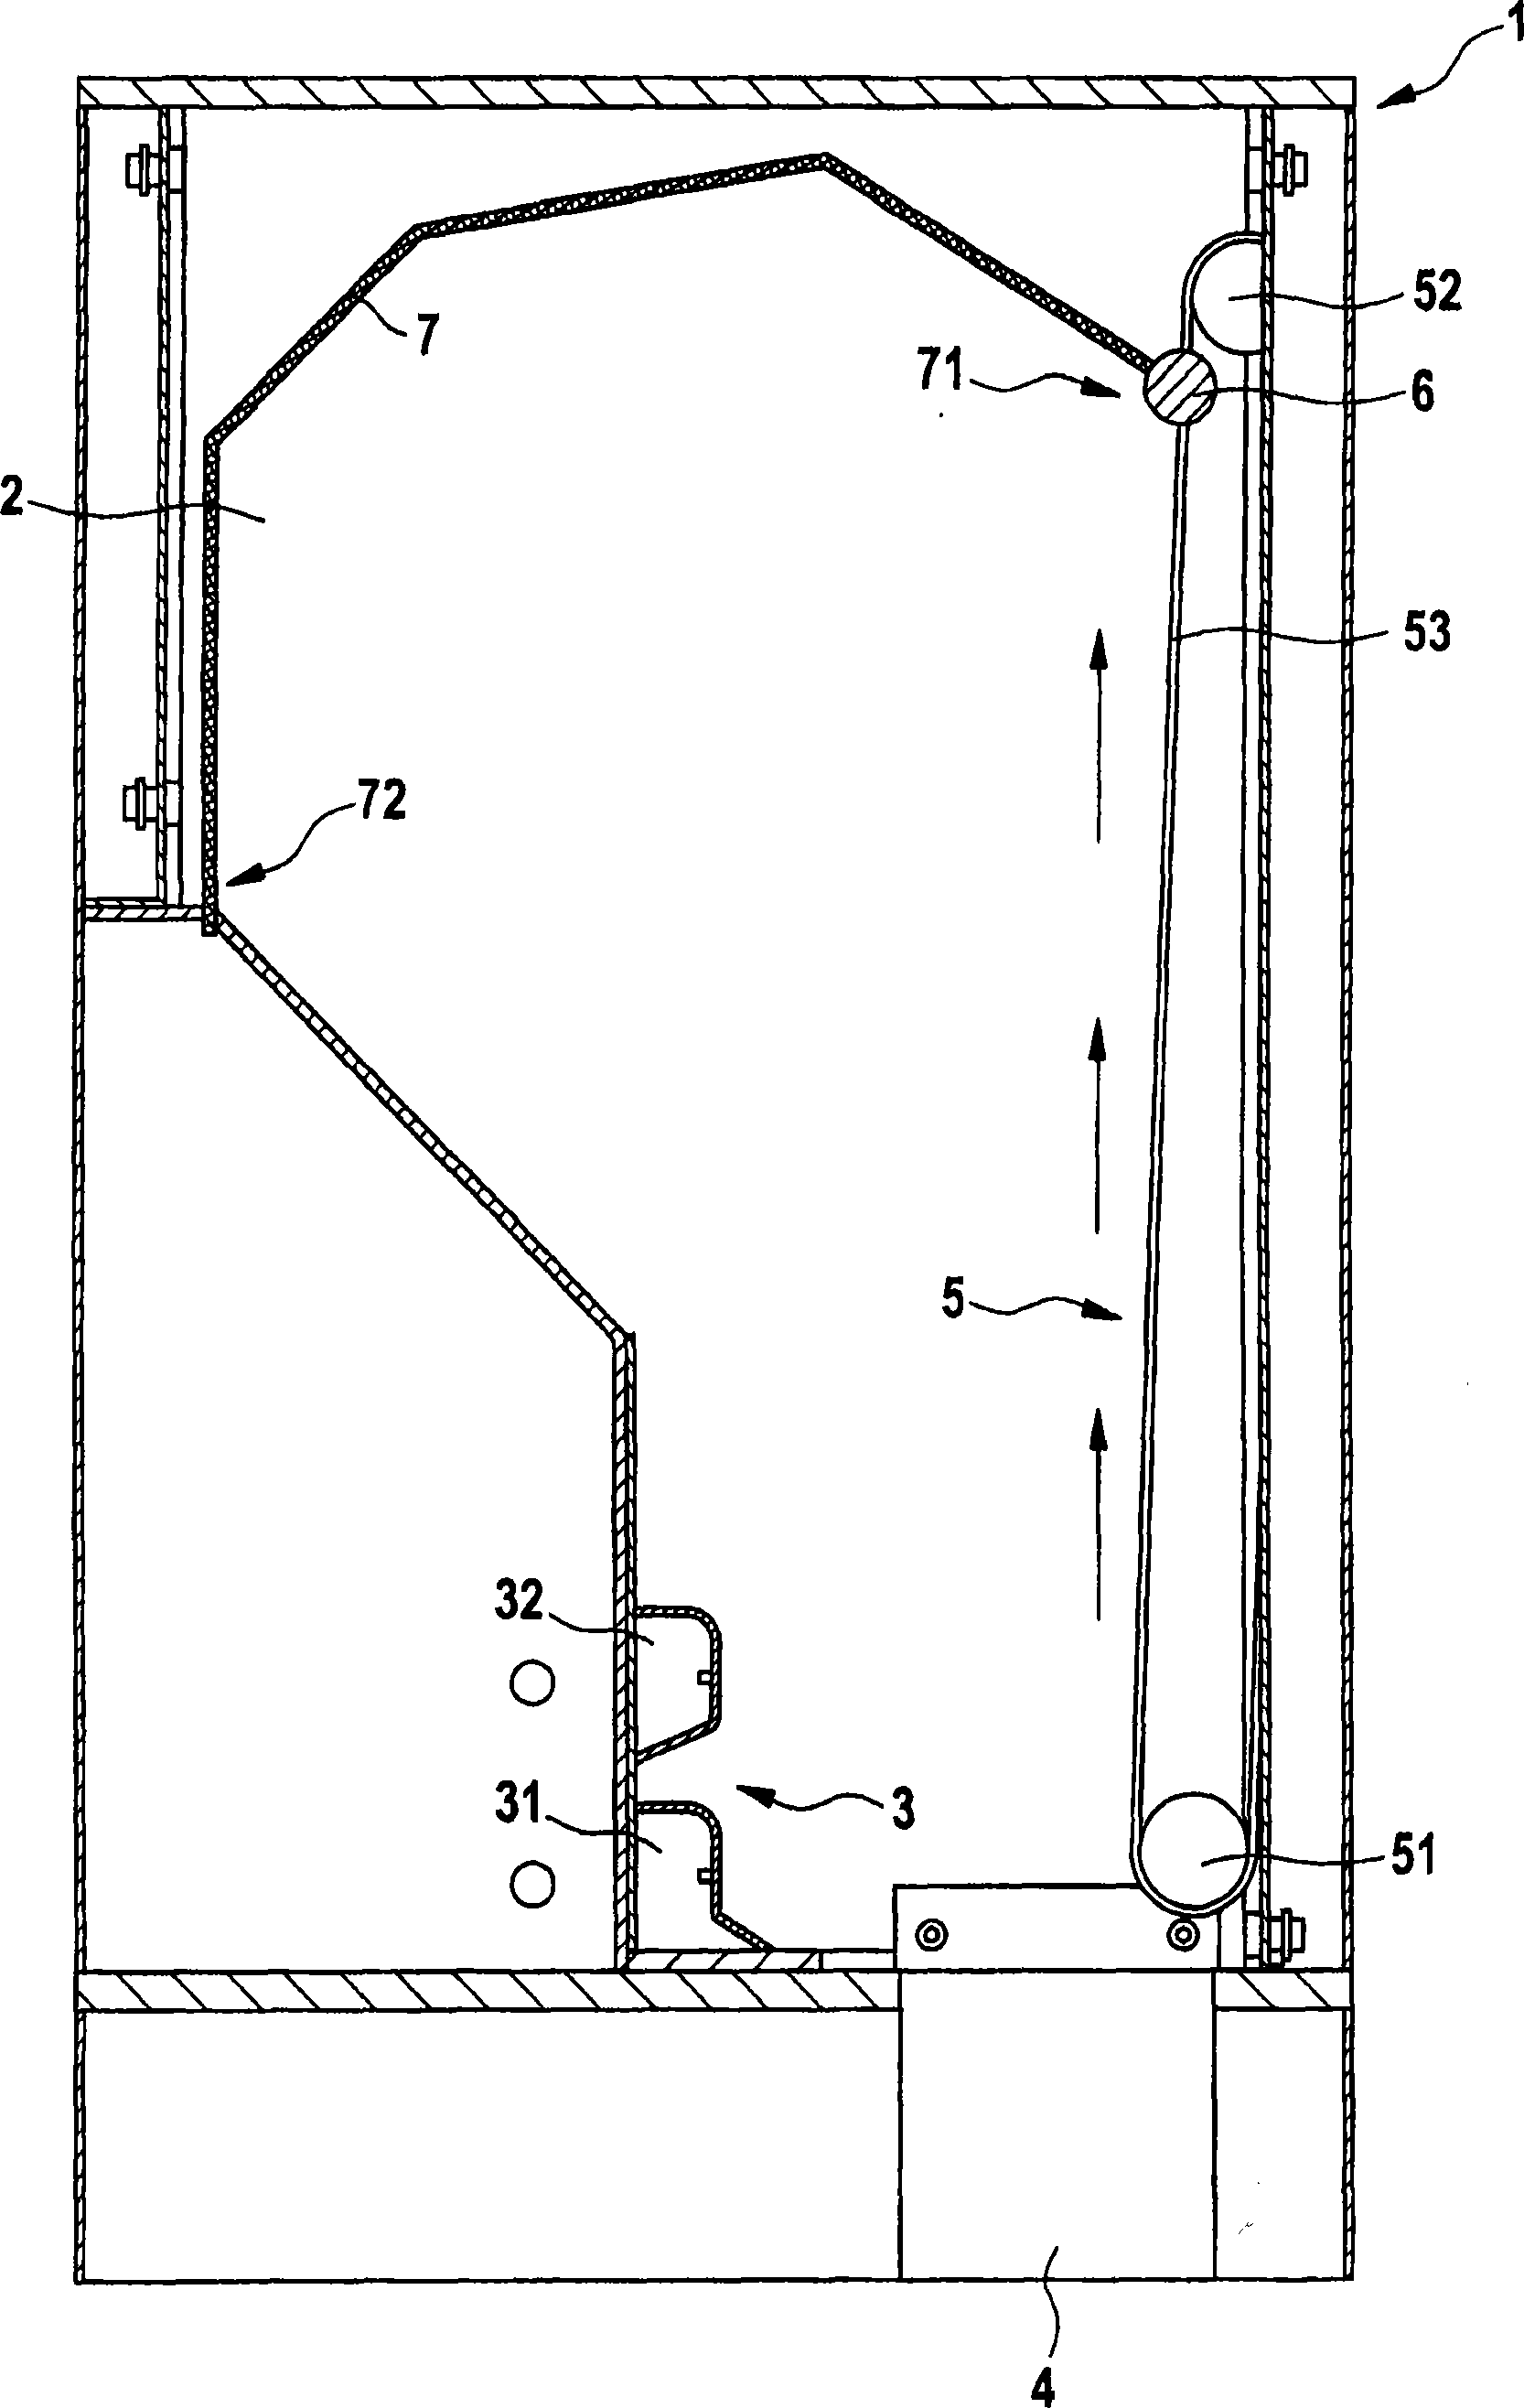 Storage apparatus and method for reducing local pressure in a storage apparatus